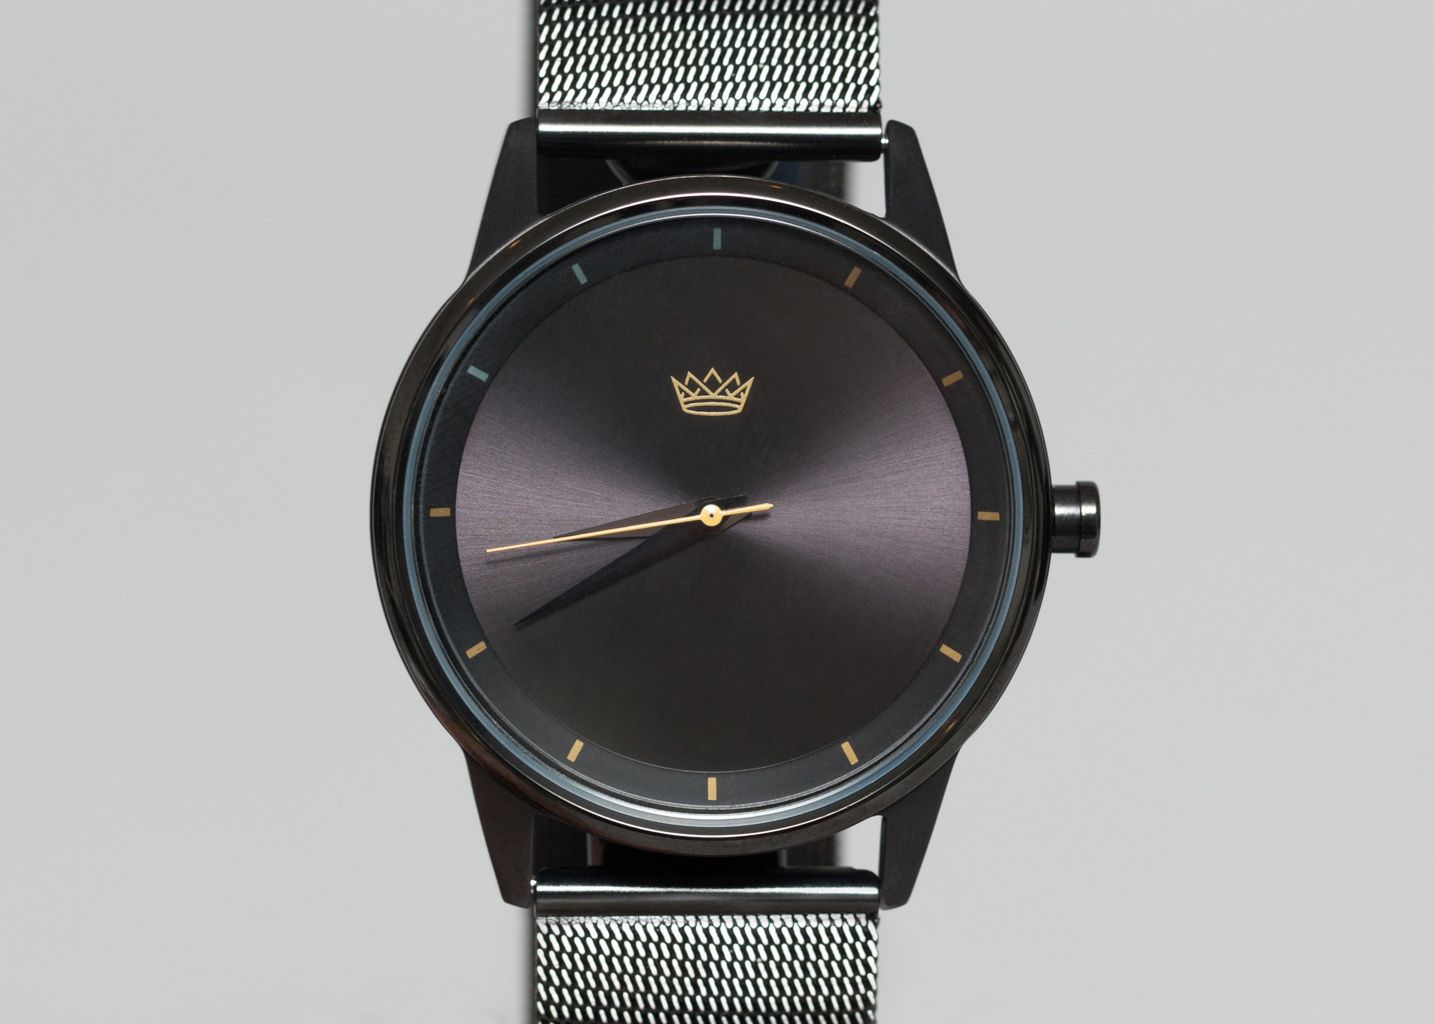 Montre #TakeYourTime - Materialiste